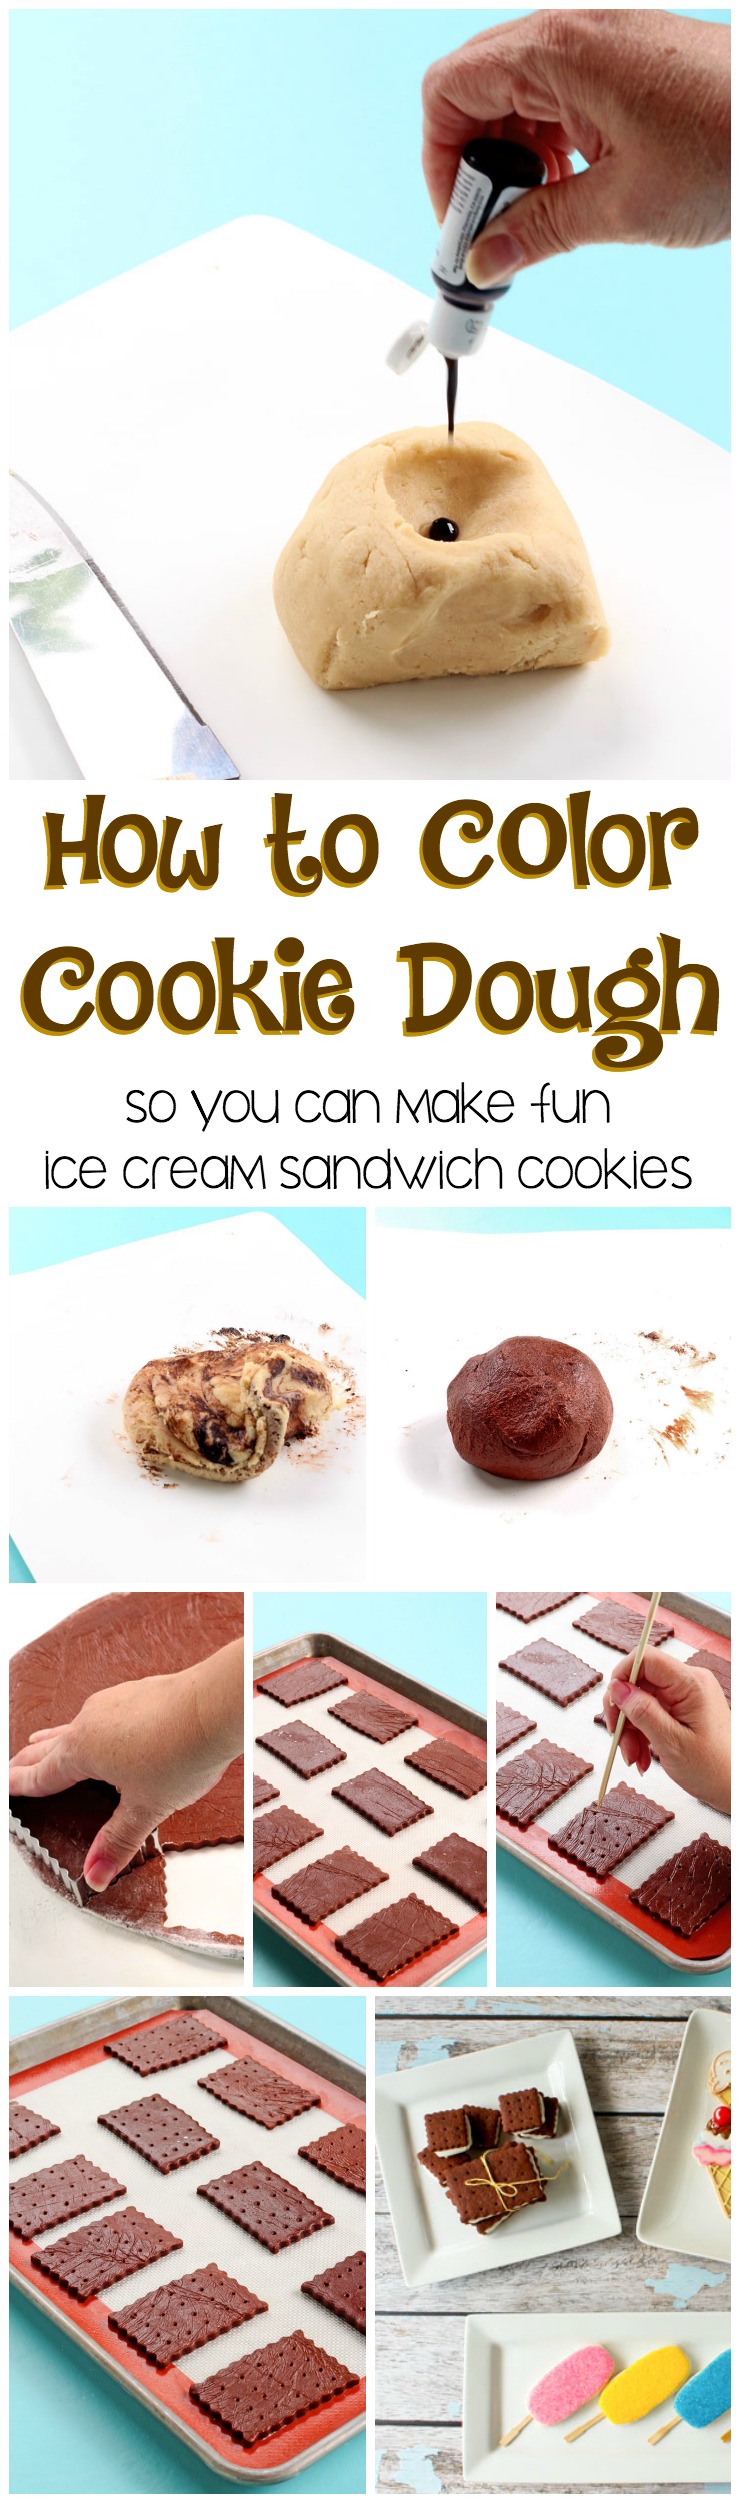 How to Color Cookie Dough for Easy Cookie Decorating | The Bearfoot Baker